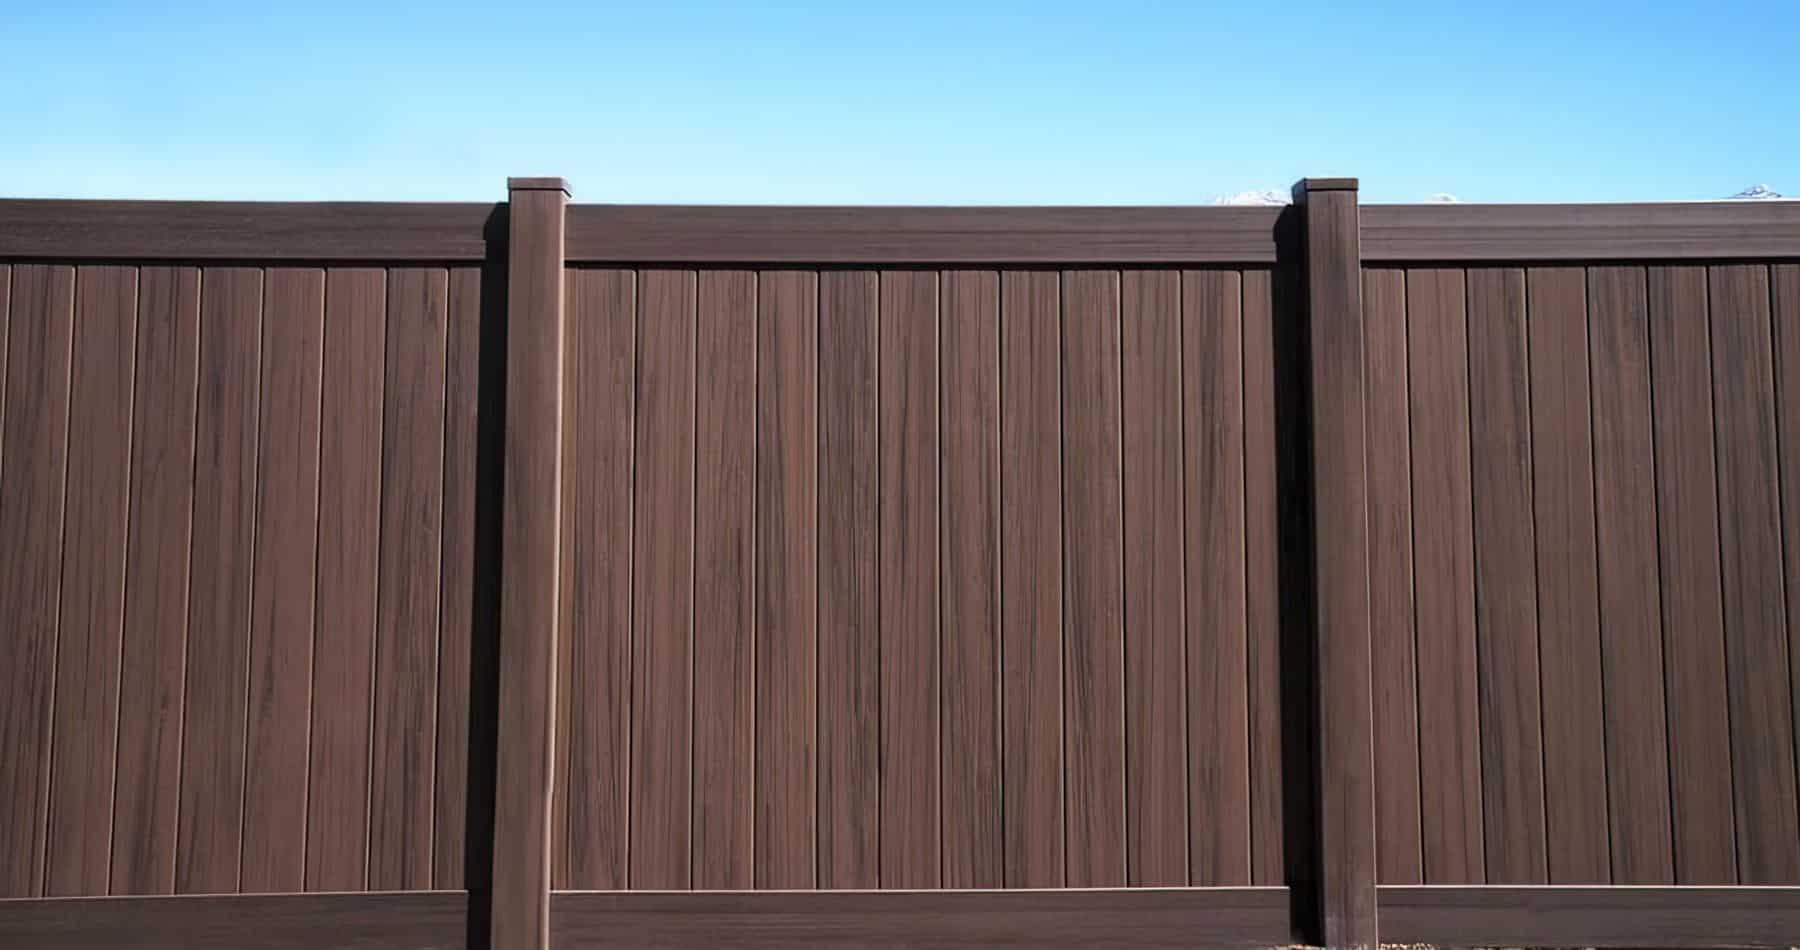 Brown vinyl fence with vertical slats and borders in front of a clear blue sky.